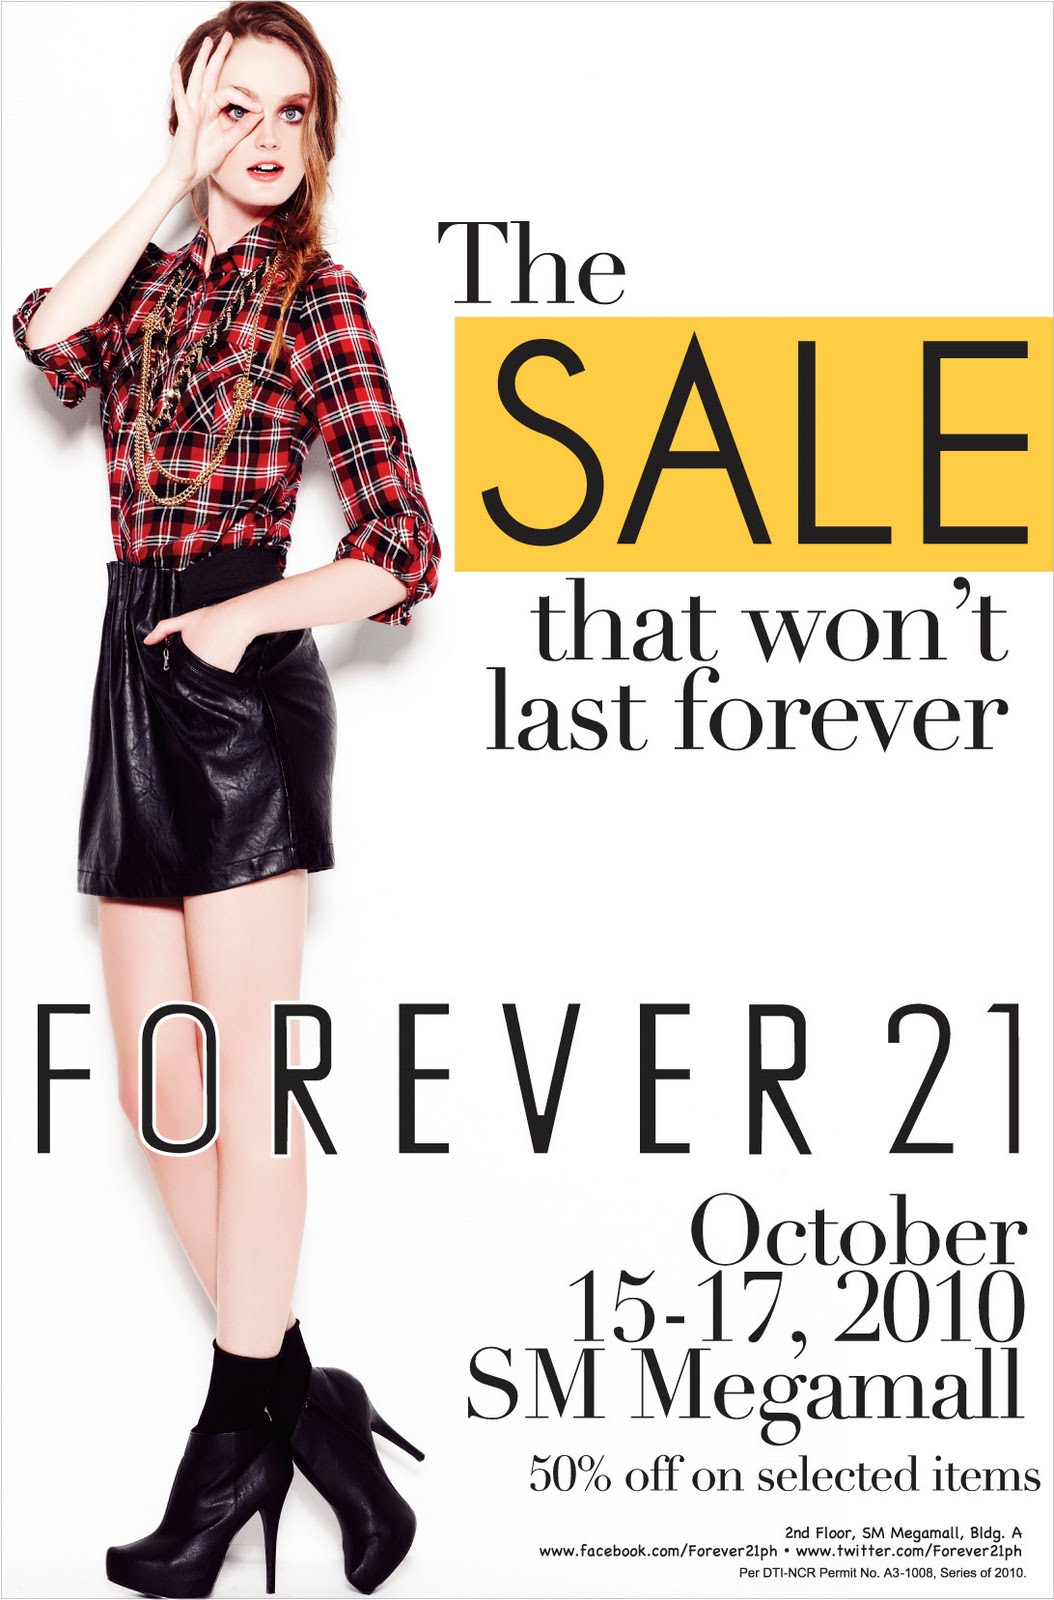 Forever 21's The SALE that won't last forever